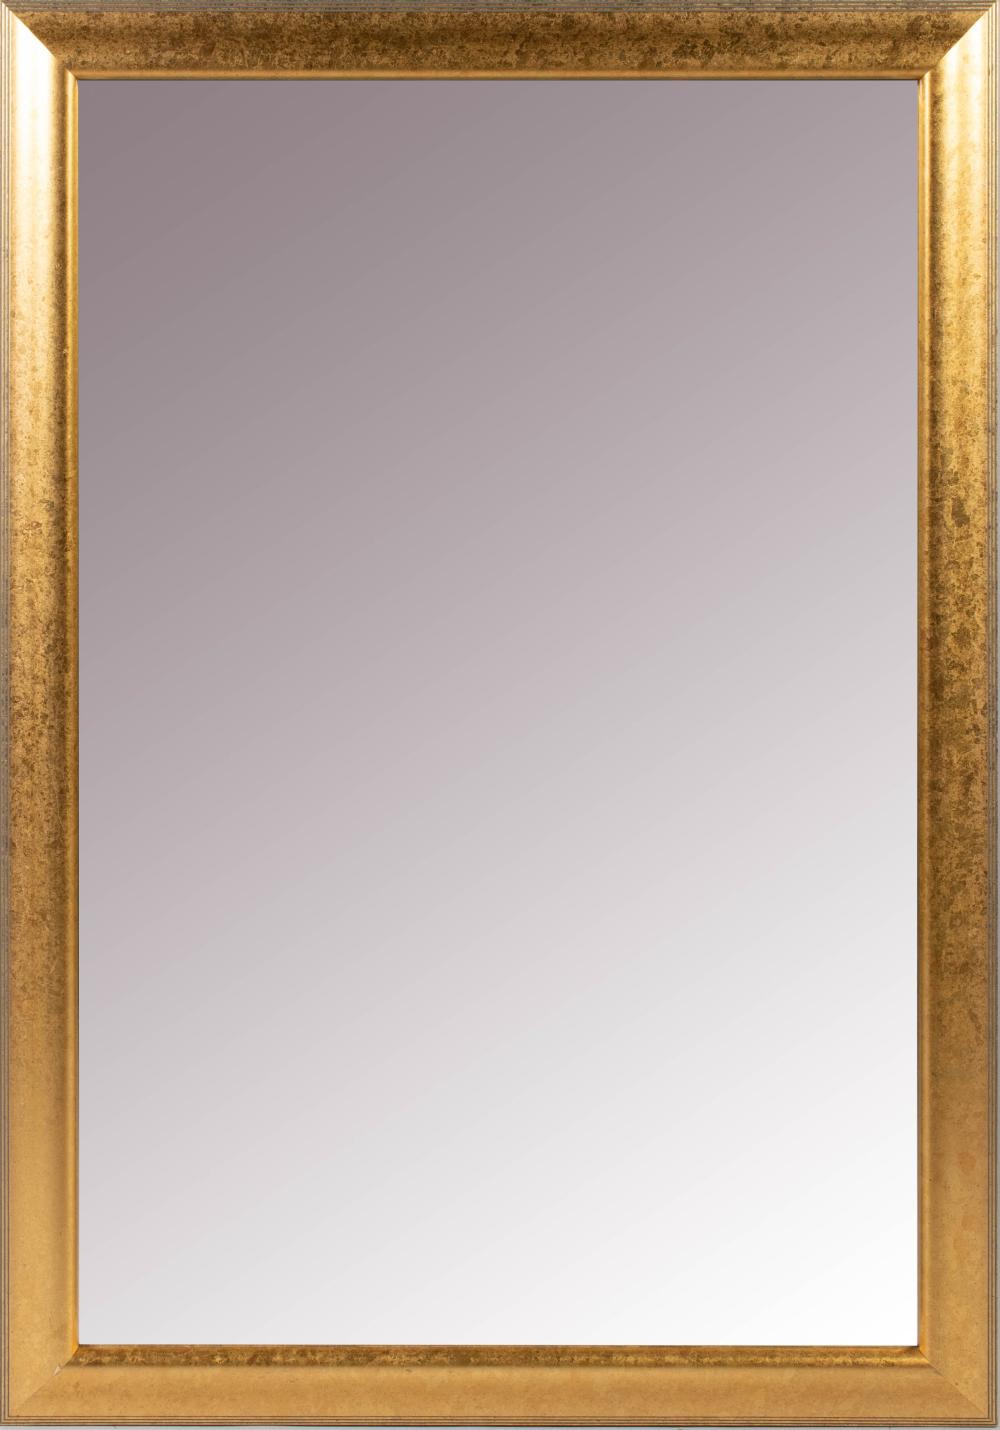 CLASSICAL STYLE GOLD FINISHED MIRROR